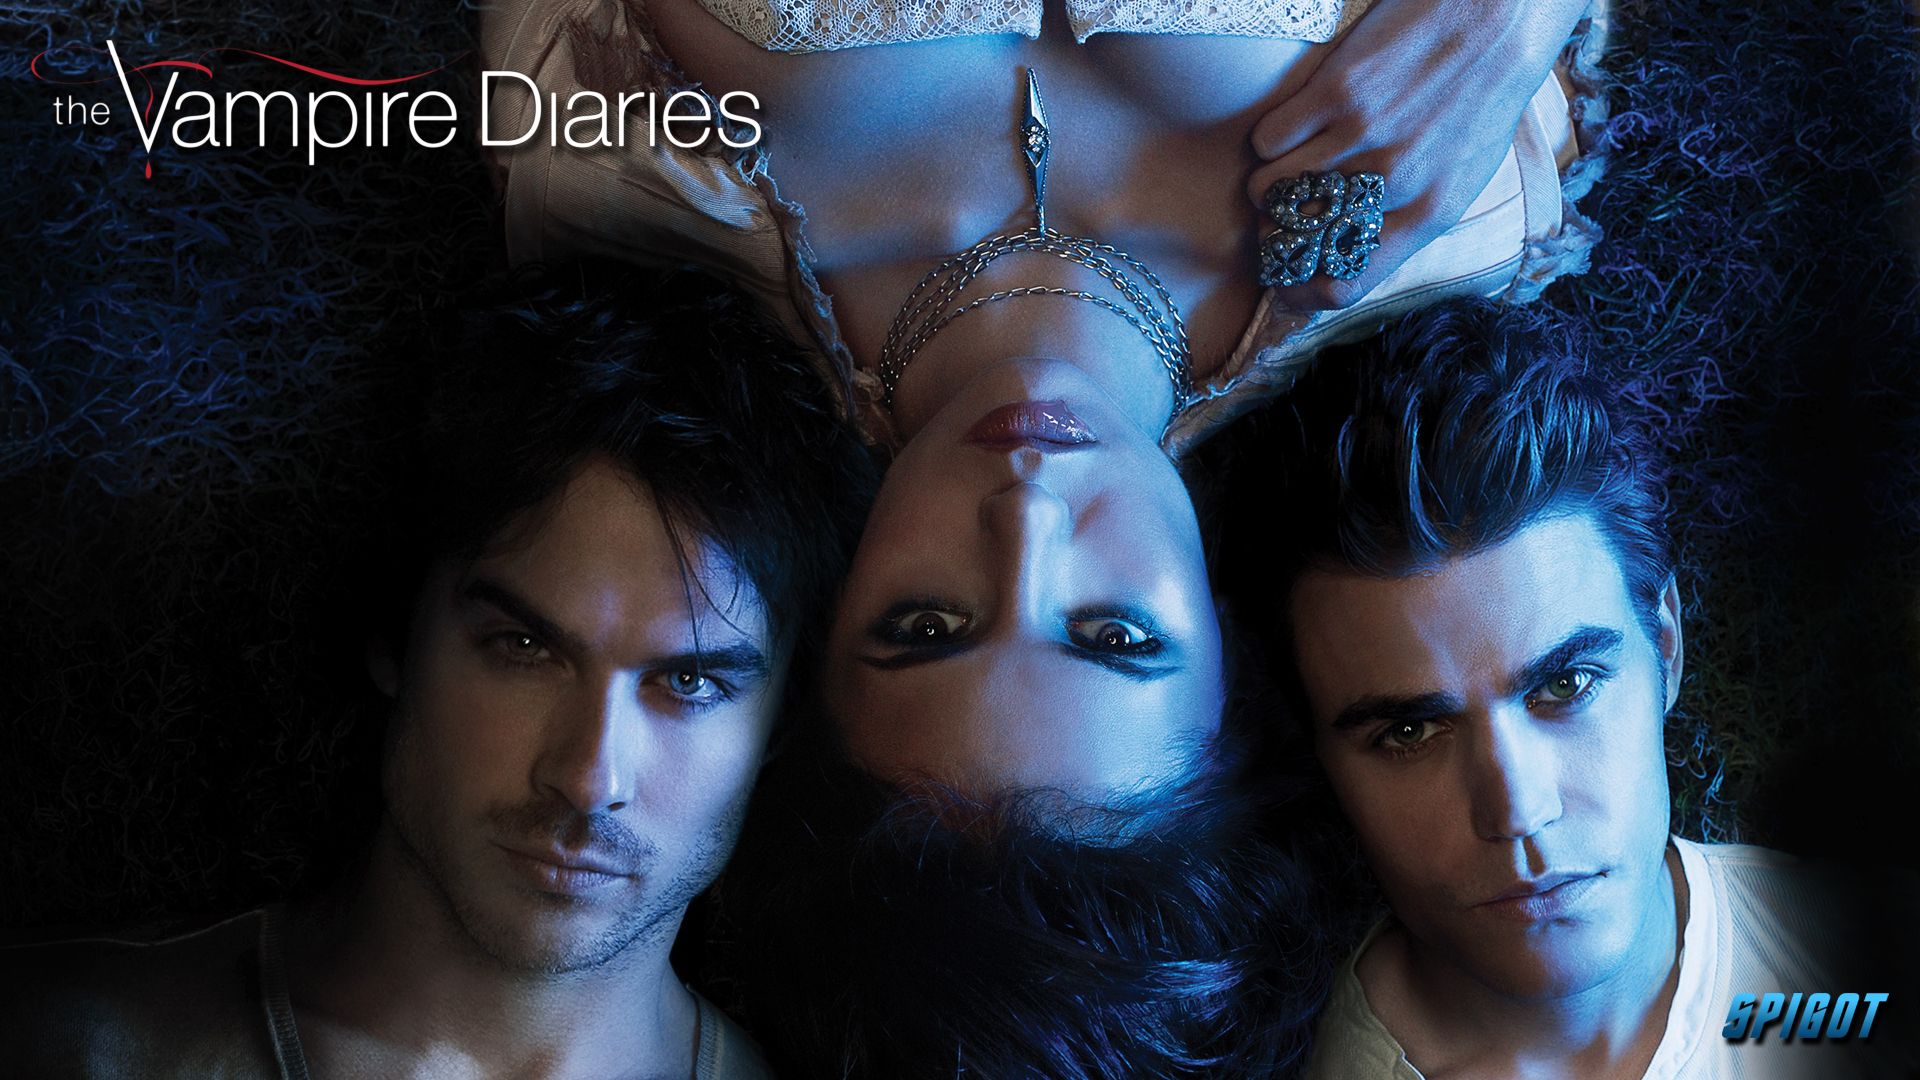 The Last Of The Vampire Diaries Wallpapers | George Spigot's Blog